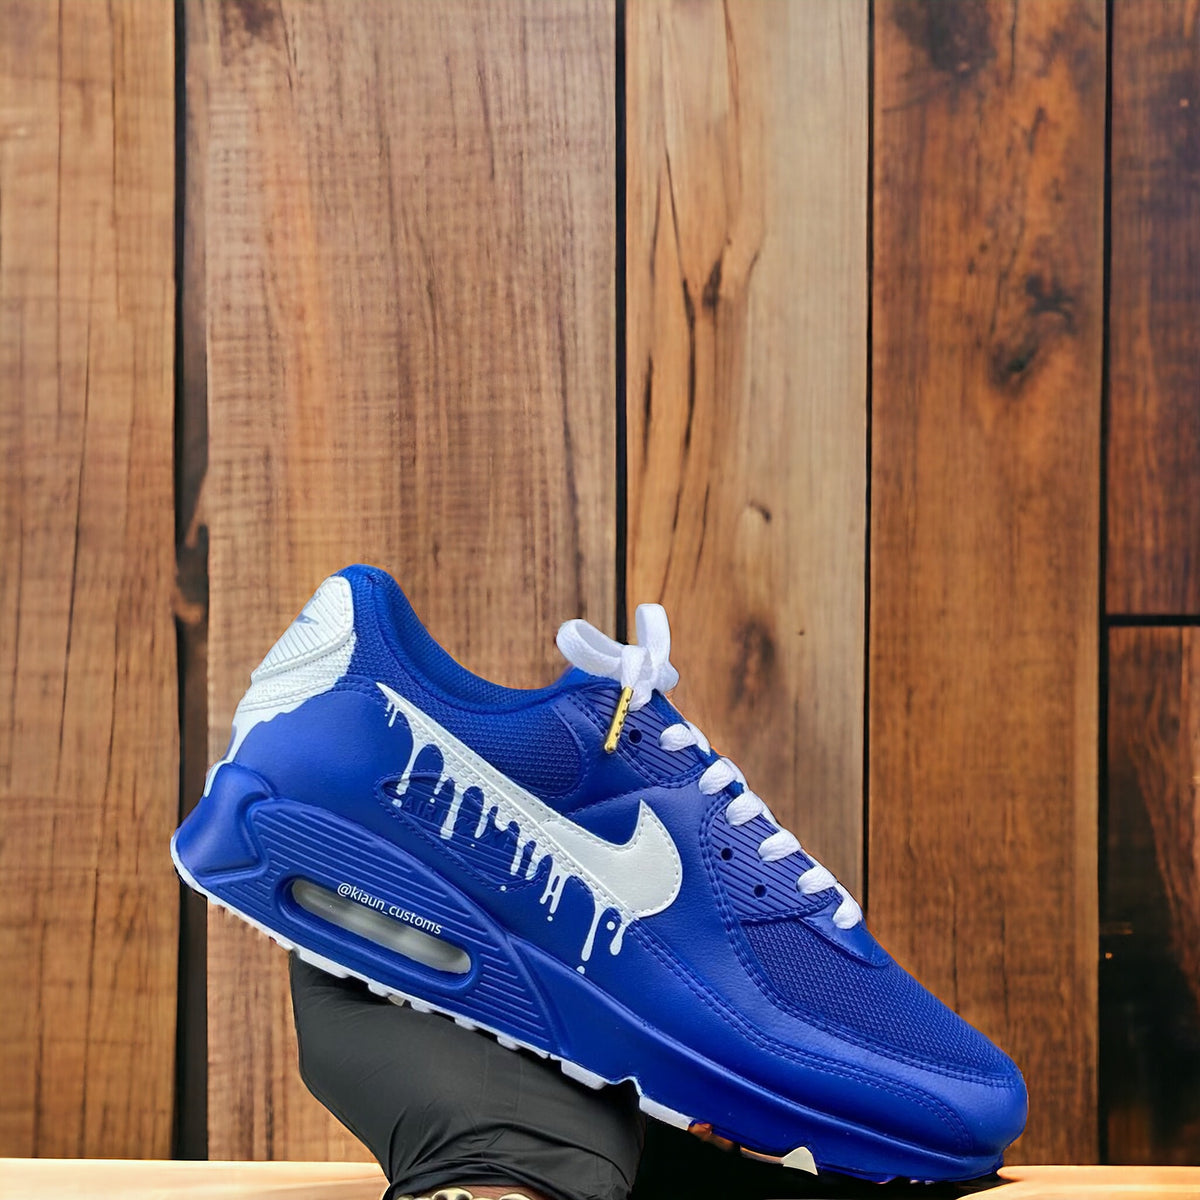 Custom Airmax Blue design with white Drip, Gift for him, Customized shoes, Gift for her, Custom Sneakers, Perfect Birthday Gift - Kiaun's Customs LLC